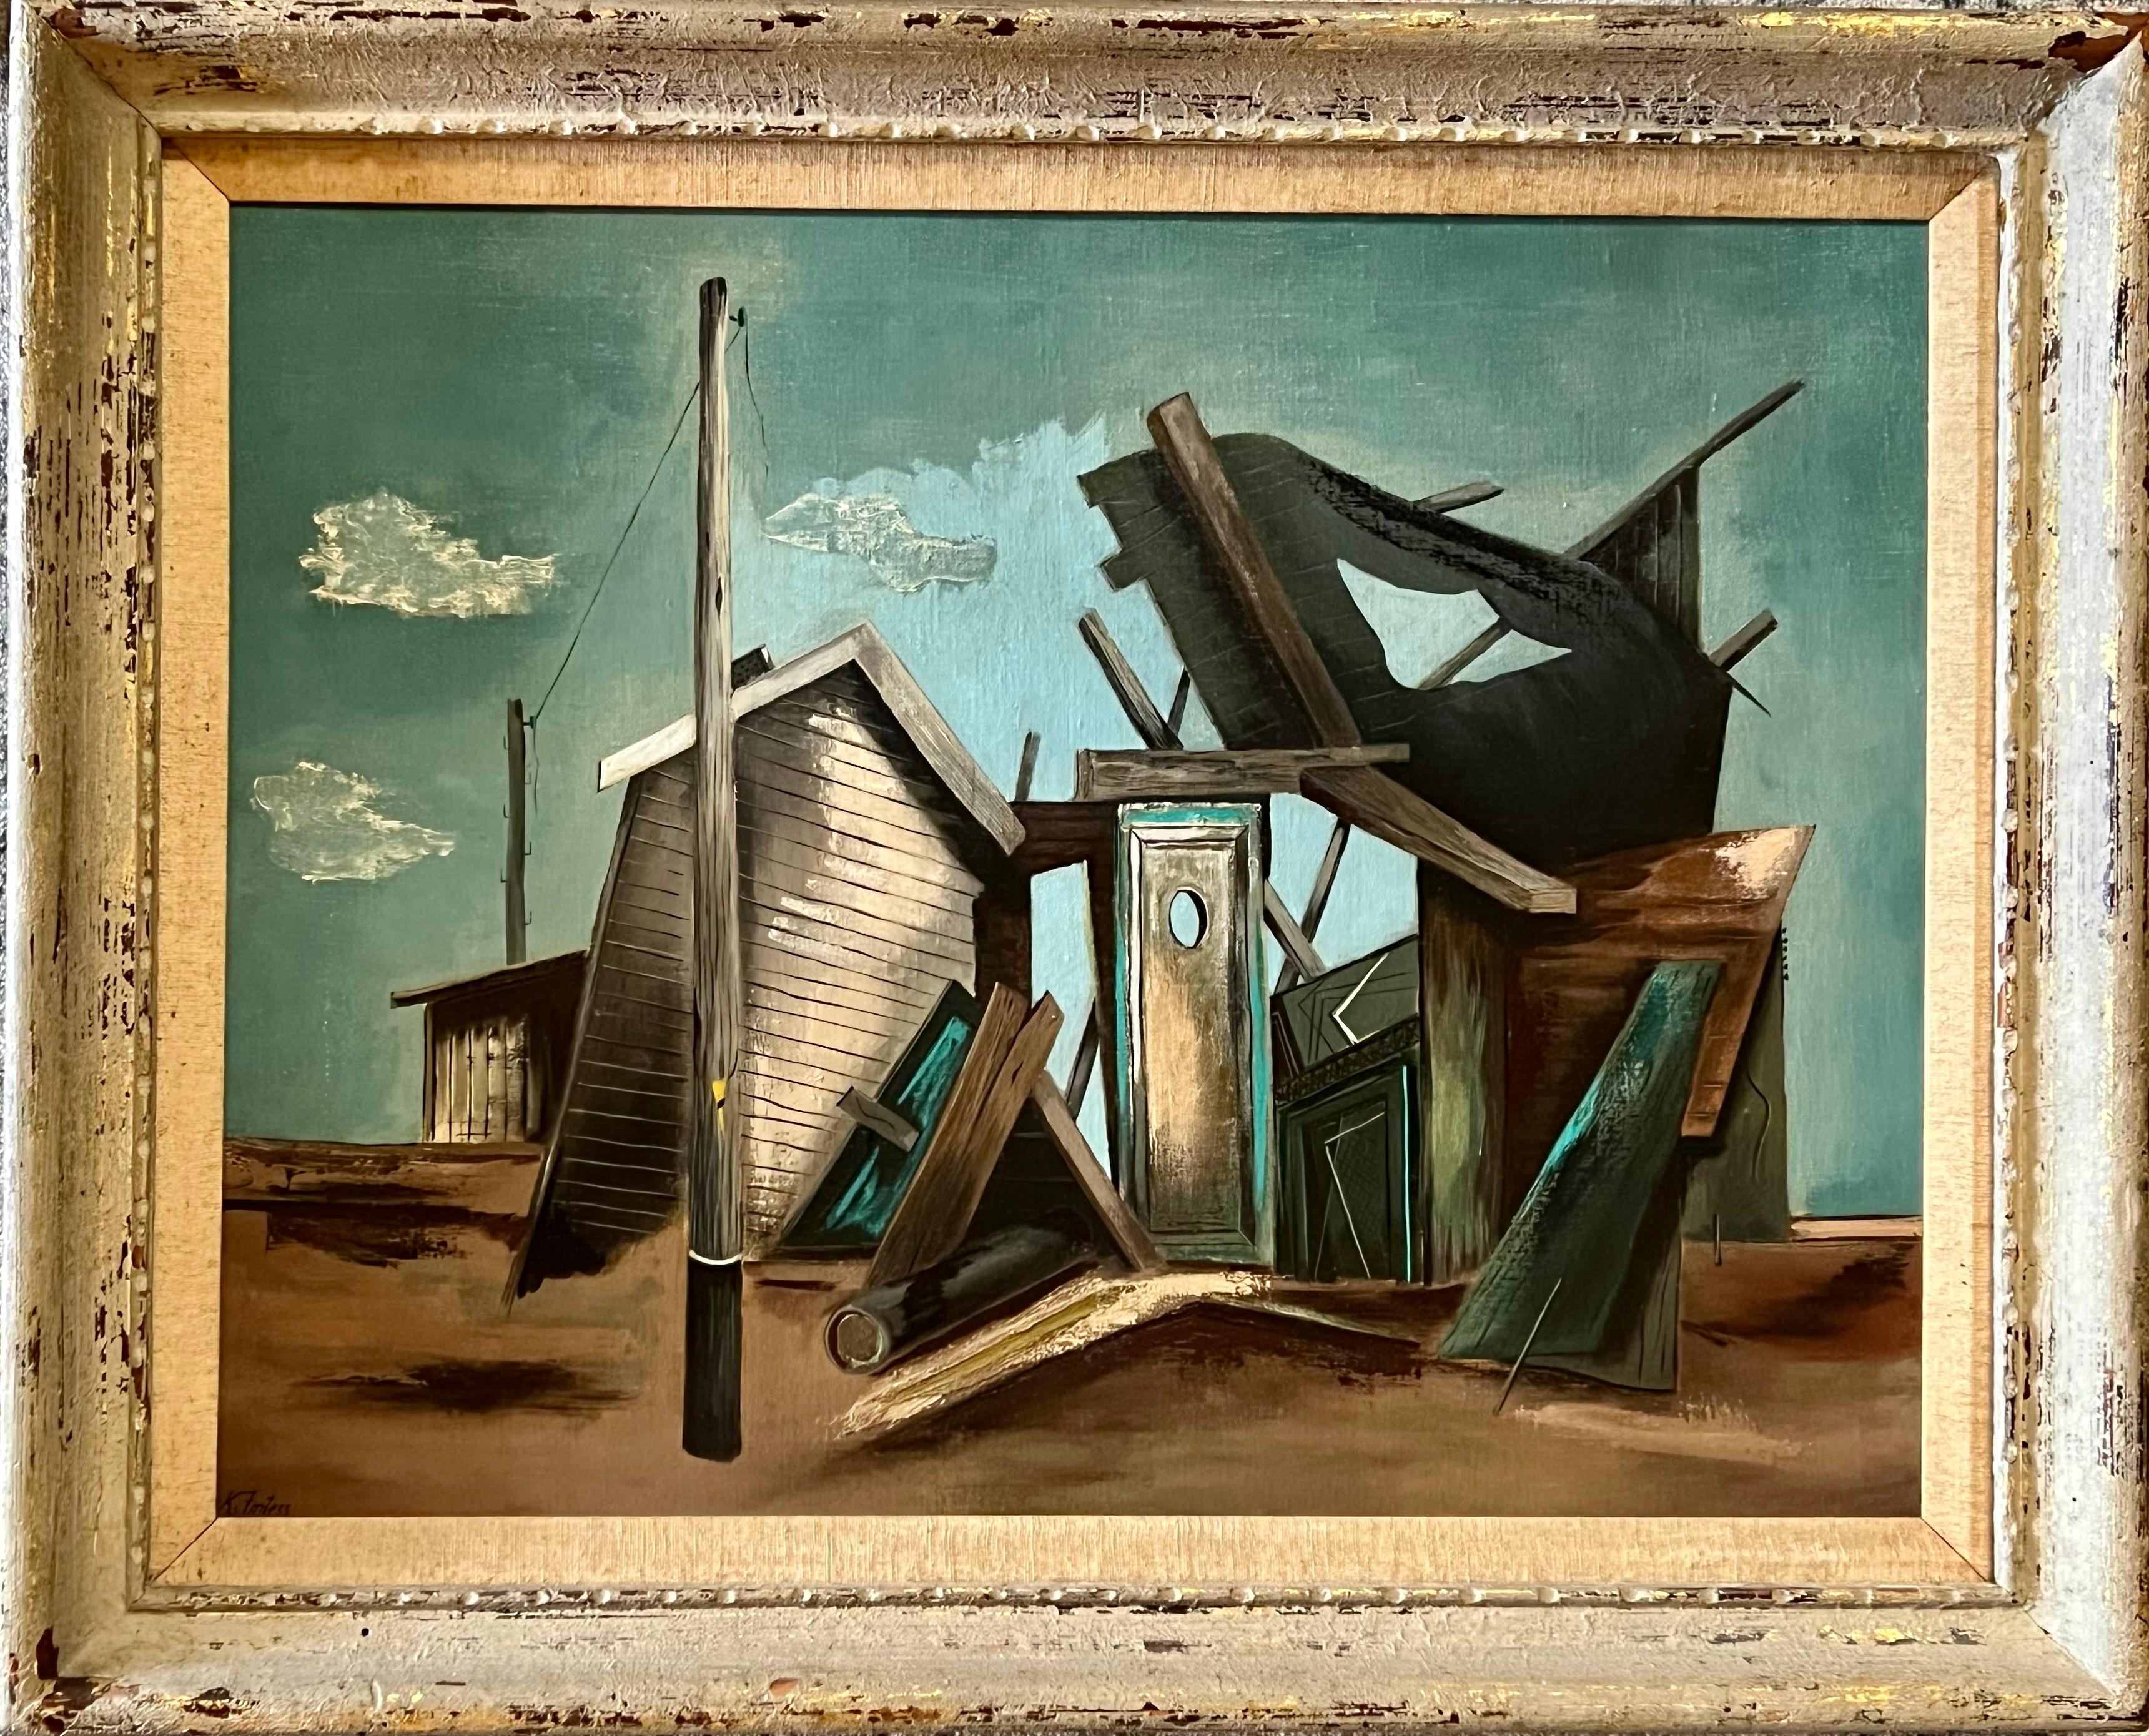 Untitled (Collapsed Shacks) - Painting by Karl Fortress